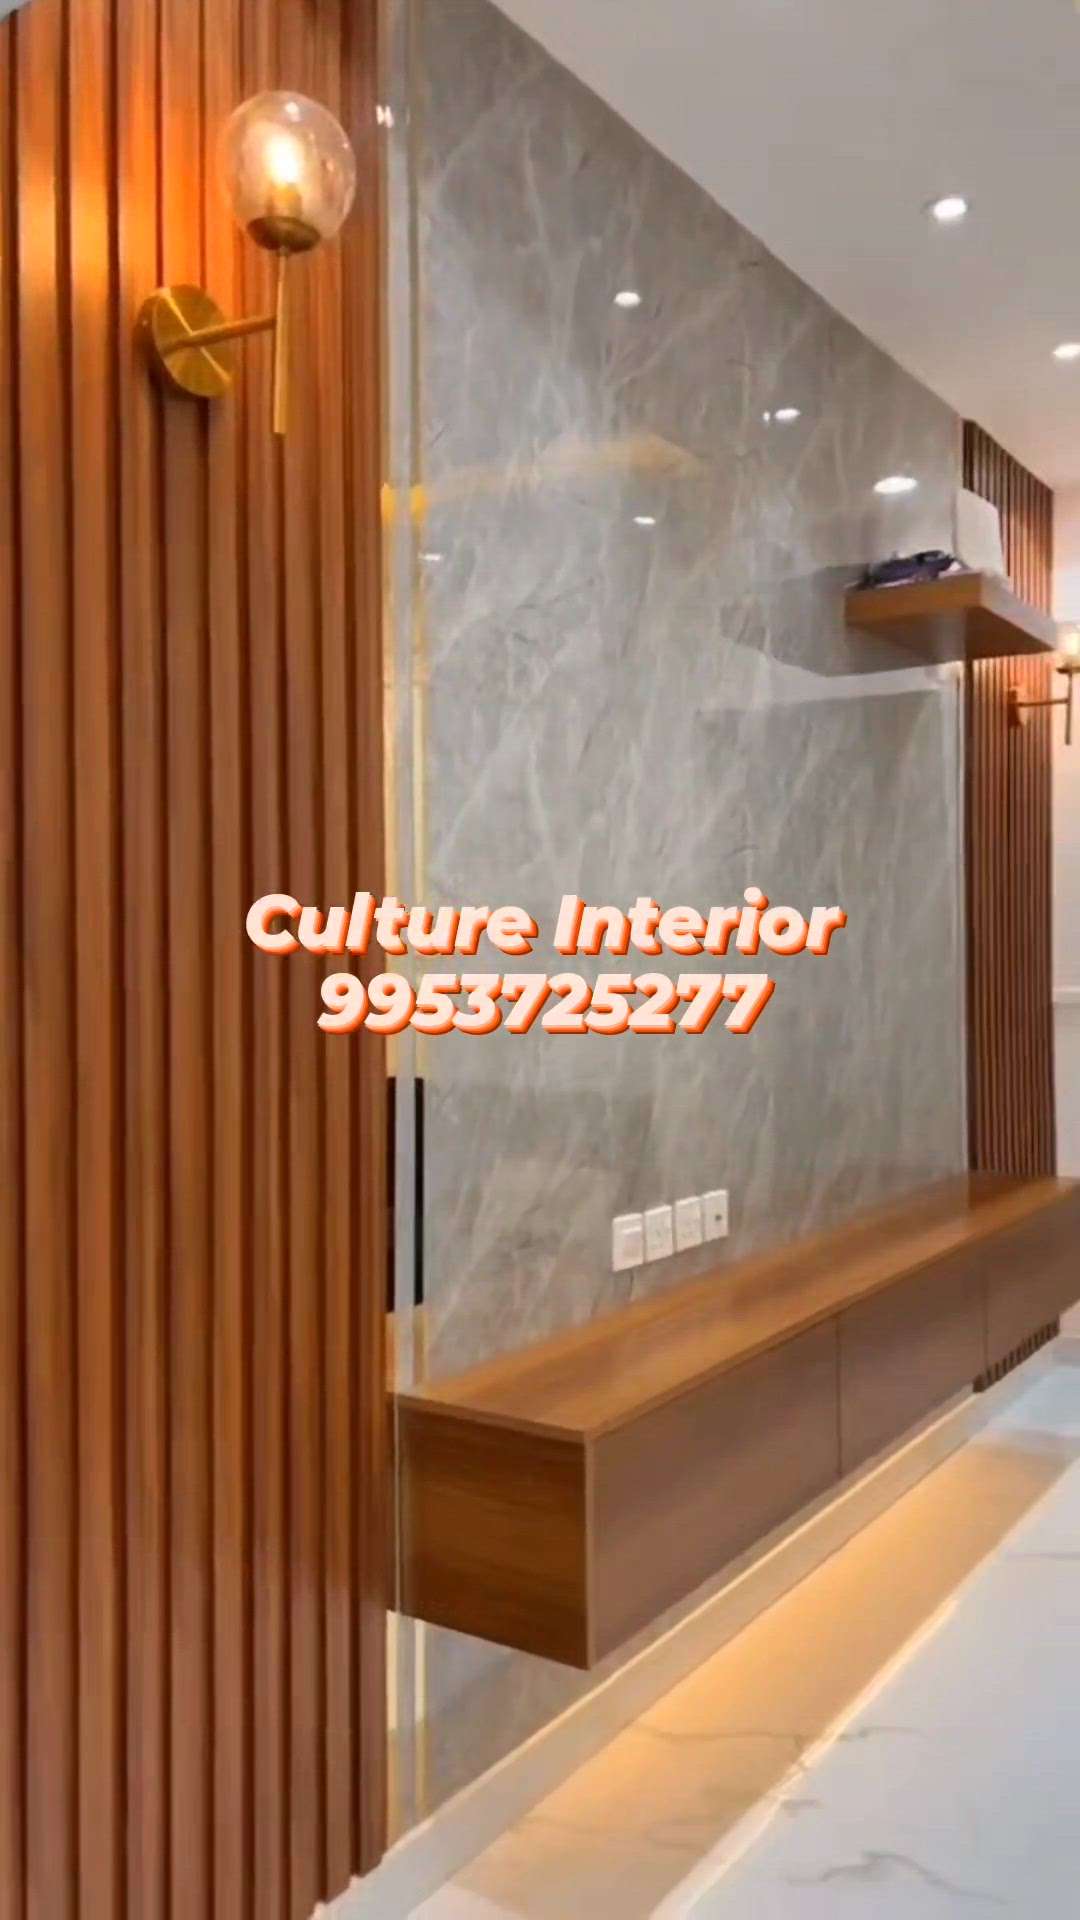 Find here the best home interiors and get design your Entire Home Including your ✓Livingroom ✓Bedroom ✓Kitchen ✓Bathroom and everything.
.
.
.
contact us  9953725277
Email I'd: cultureinterior2017@gmail.com
Website: www.cultureinterior.in

Please do like ,share & subscribe our you tube channel https://youtube.com/channel/UC9Hm9090aOlJOcszdAb6-PQ
.
.
.
#interiors #interiordesign #interior #design #homedecor #decor #architecture #home #interiordesigner #homedesign #interiorstyling #furniture #interiordecor #decoration #art #luxury #designer #inspiration #interiordecorating #style #homesweethome #livingroom #interiorinspo #furnituredesign #handmade #homestyle #interiorstyle #interiorinspirationss